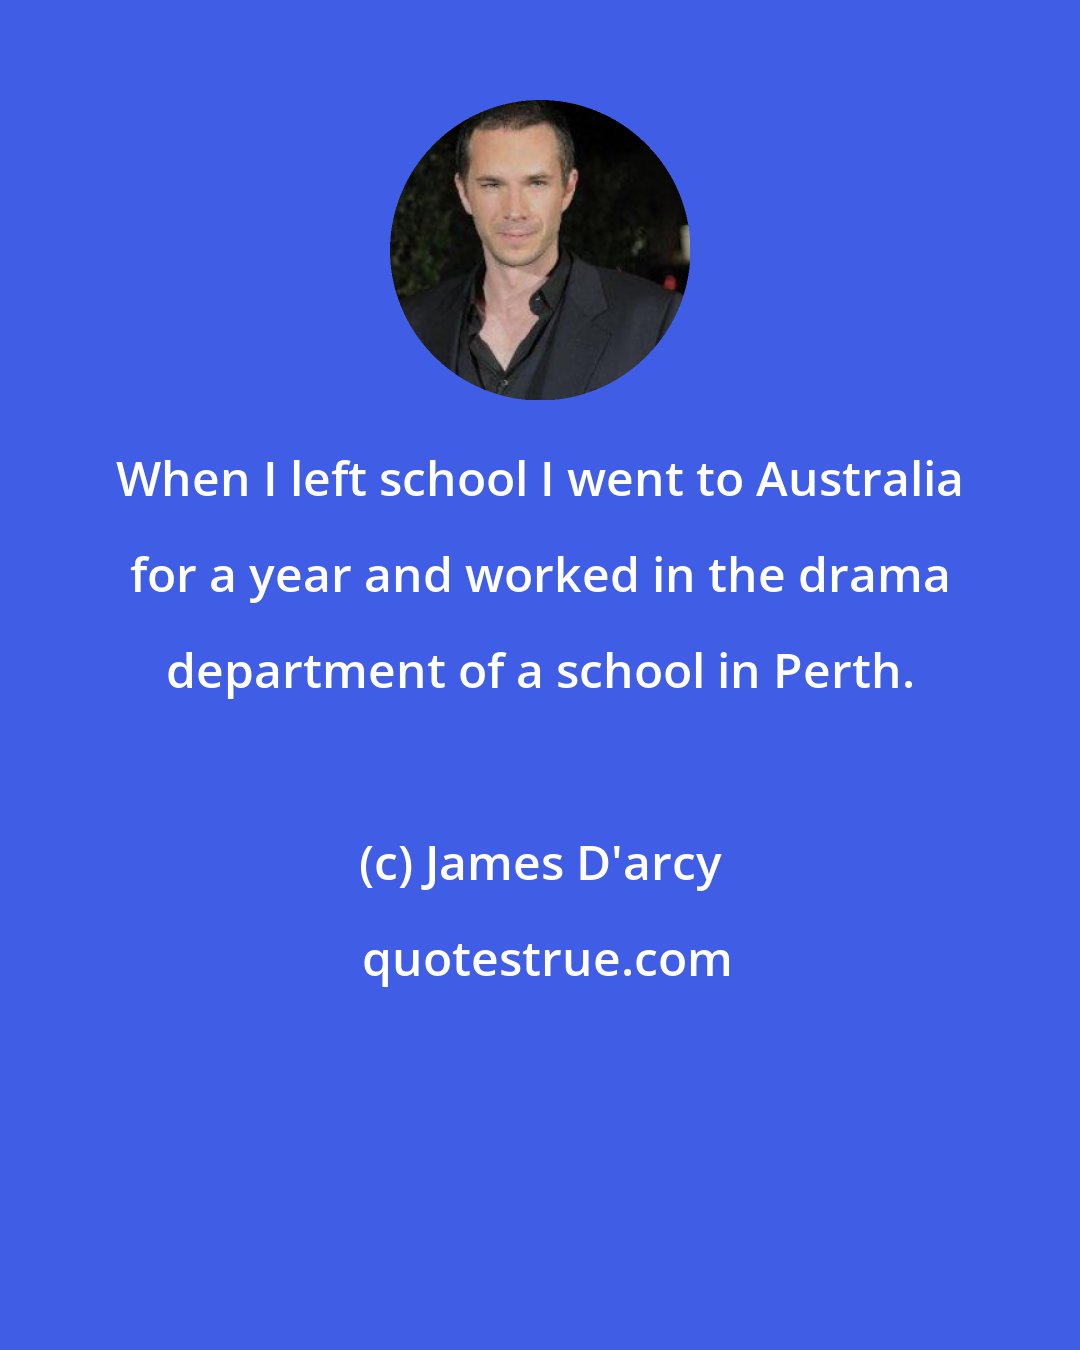 James D'arcy: When I left school I went to Australia for a year and worked in the drama department of a school in Perth.